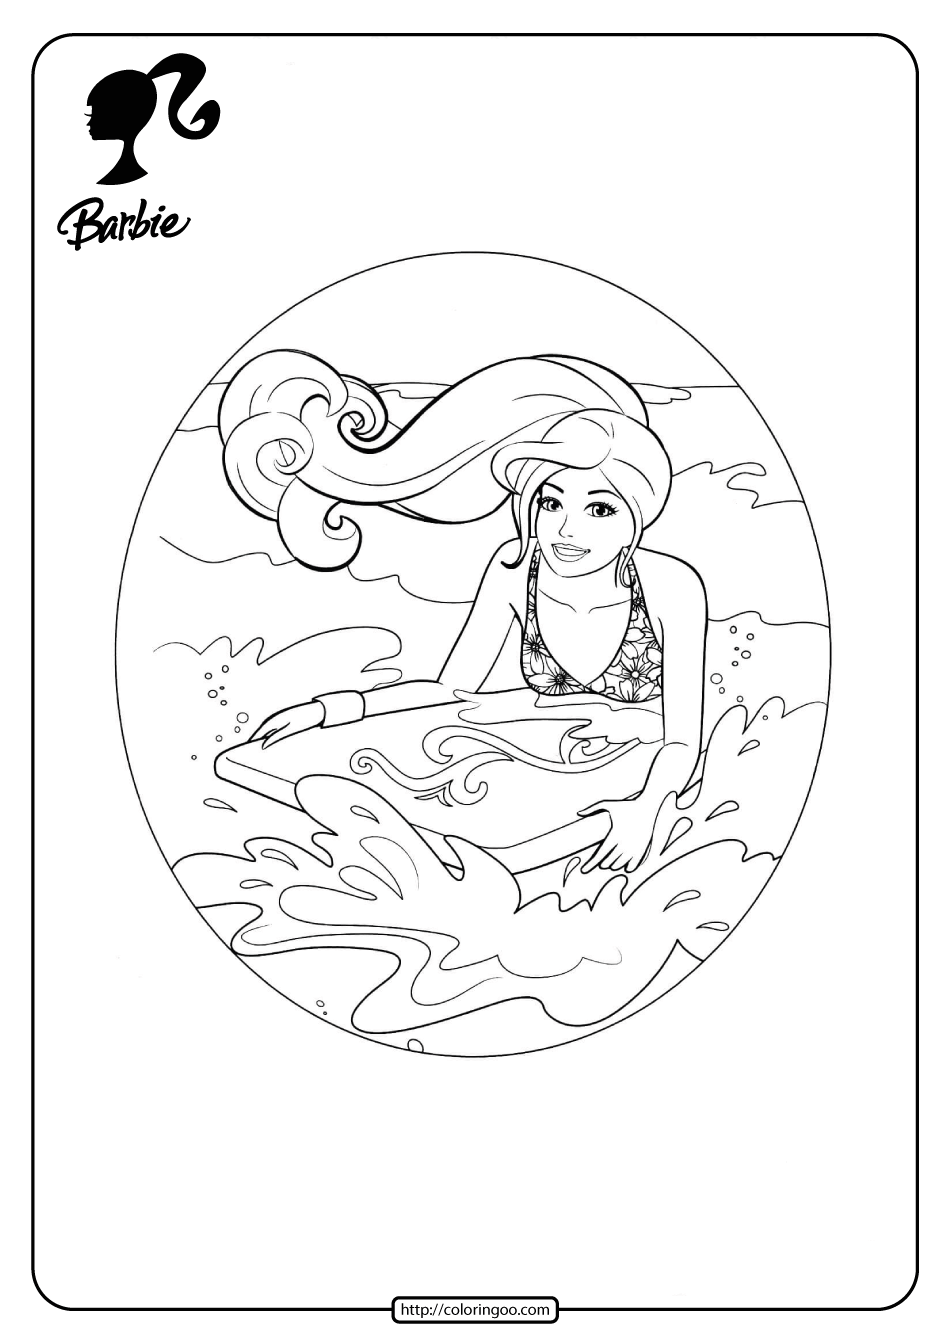 Free Printable Barbie Surfing Pdf Coloring Pages 20